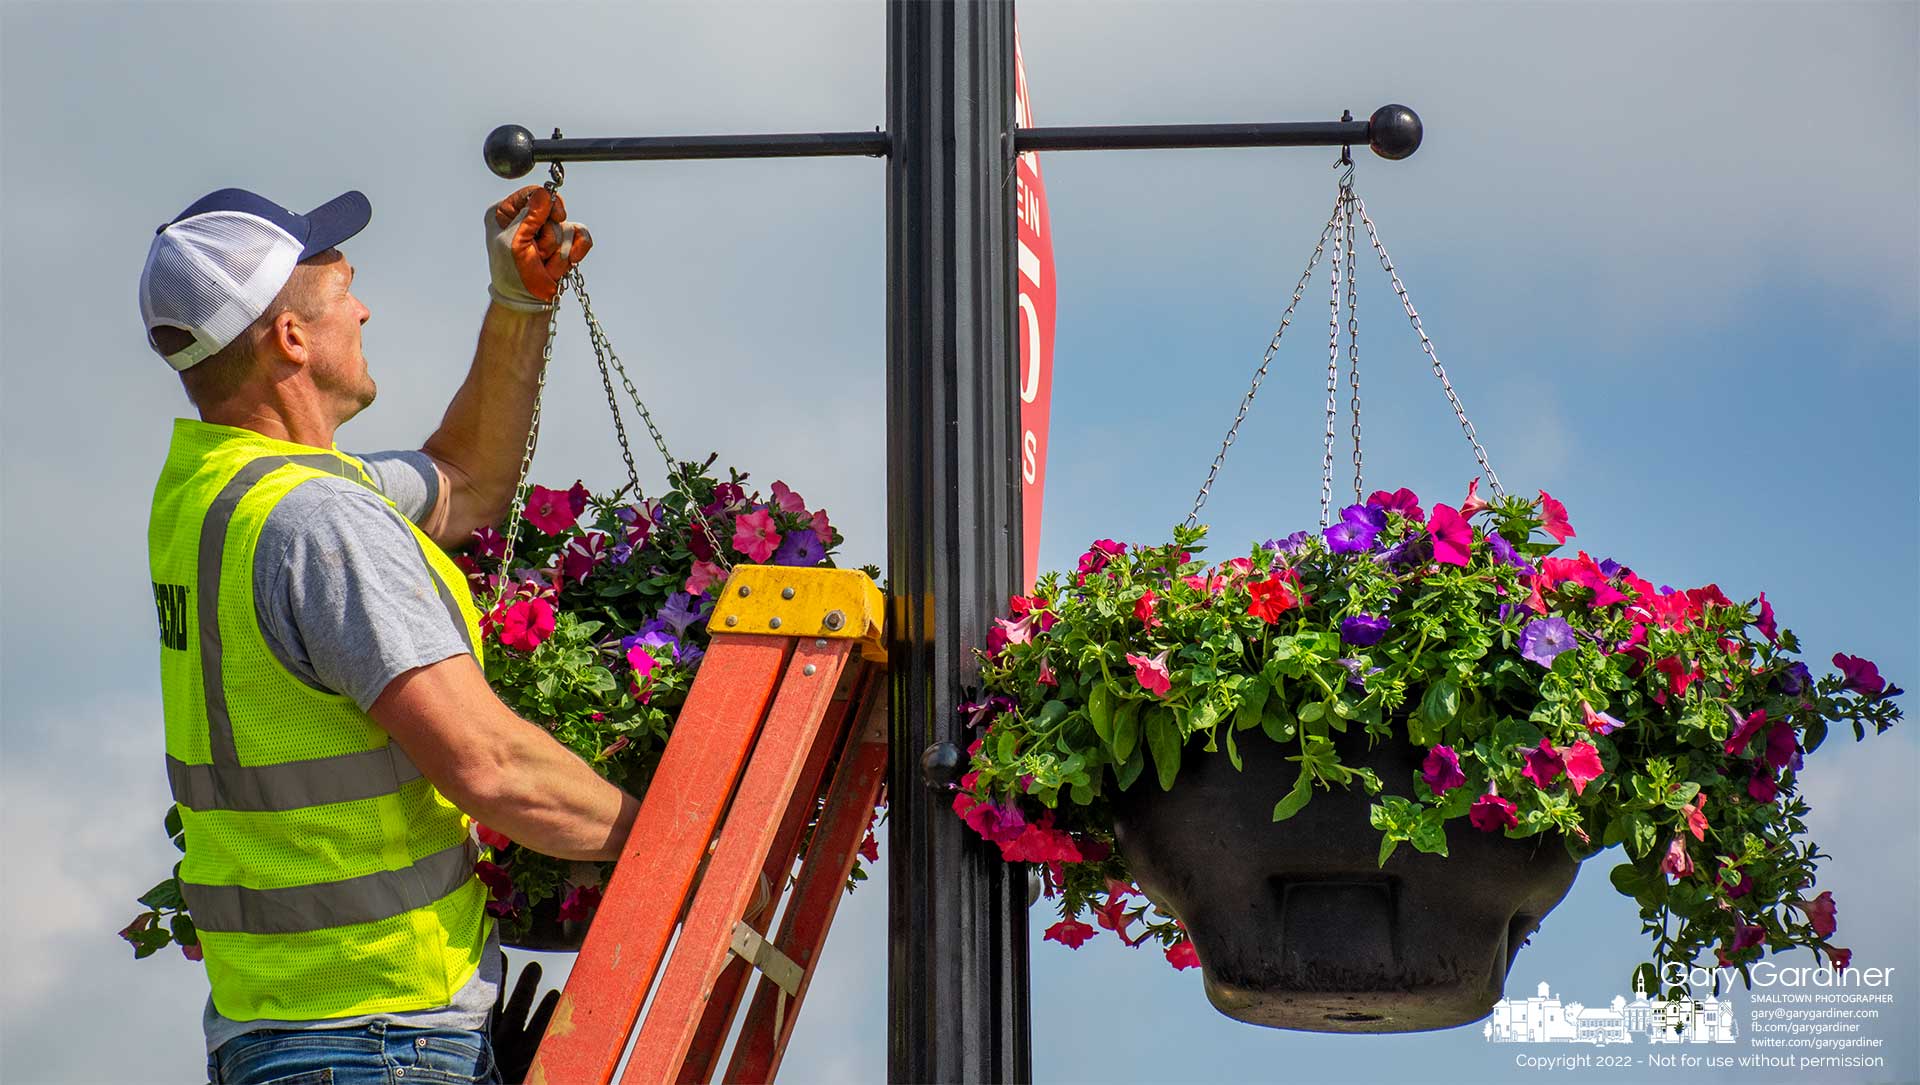 A Westerville Parks worker hangs a basket of petunias on a streetlight pole at the Main Street bridge as the city completes one of its Springtime chores. My Final Photo for May 19, 2022.